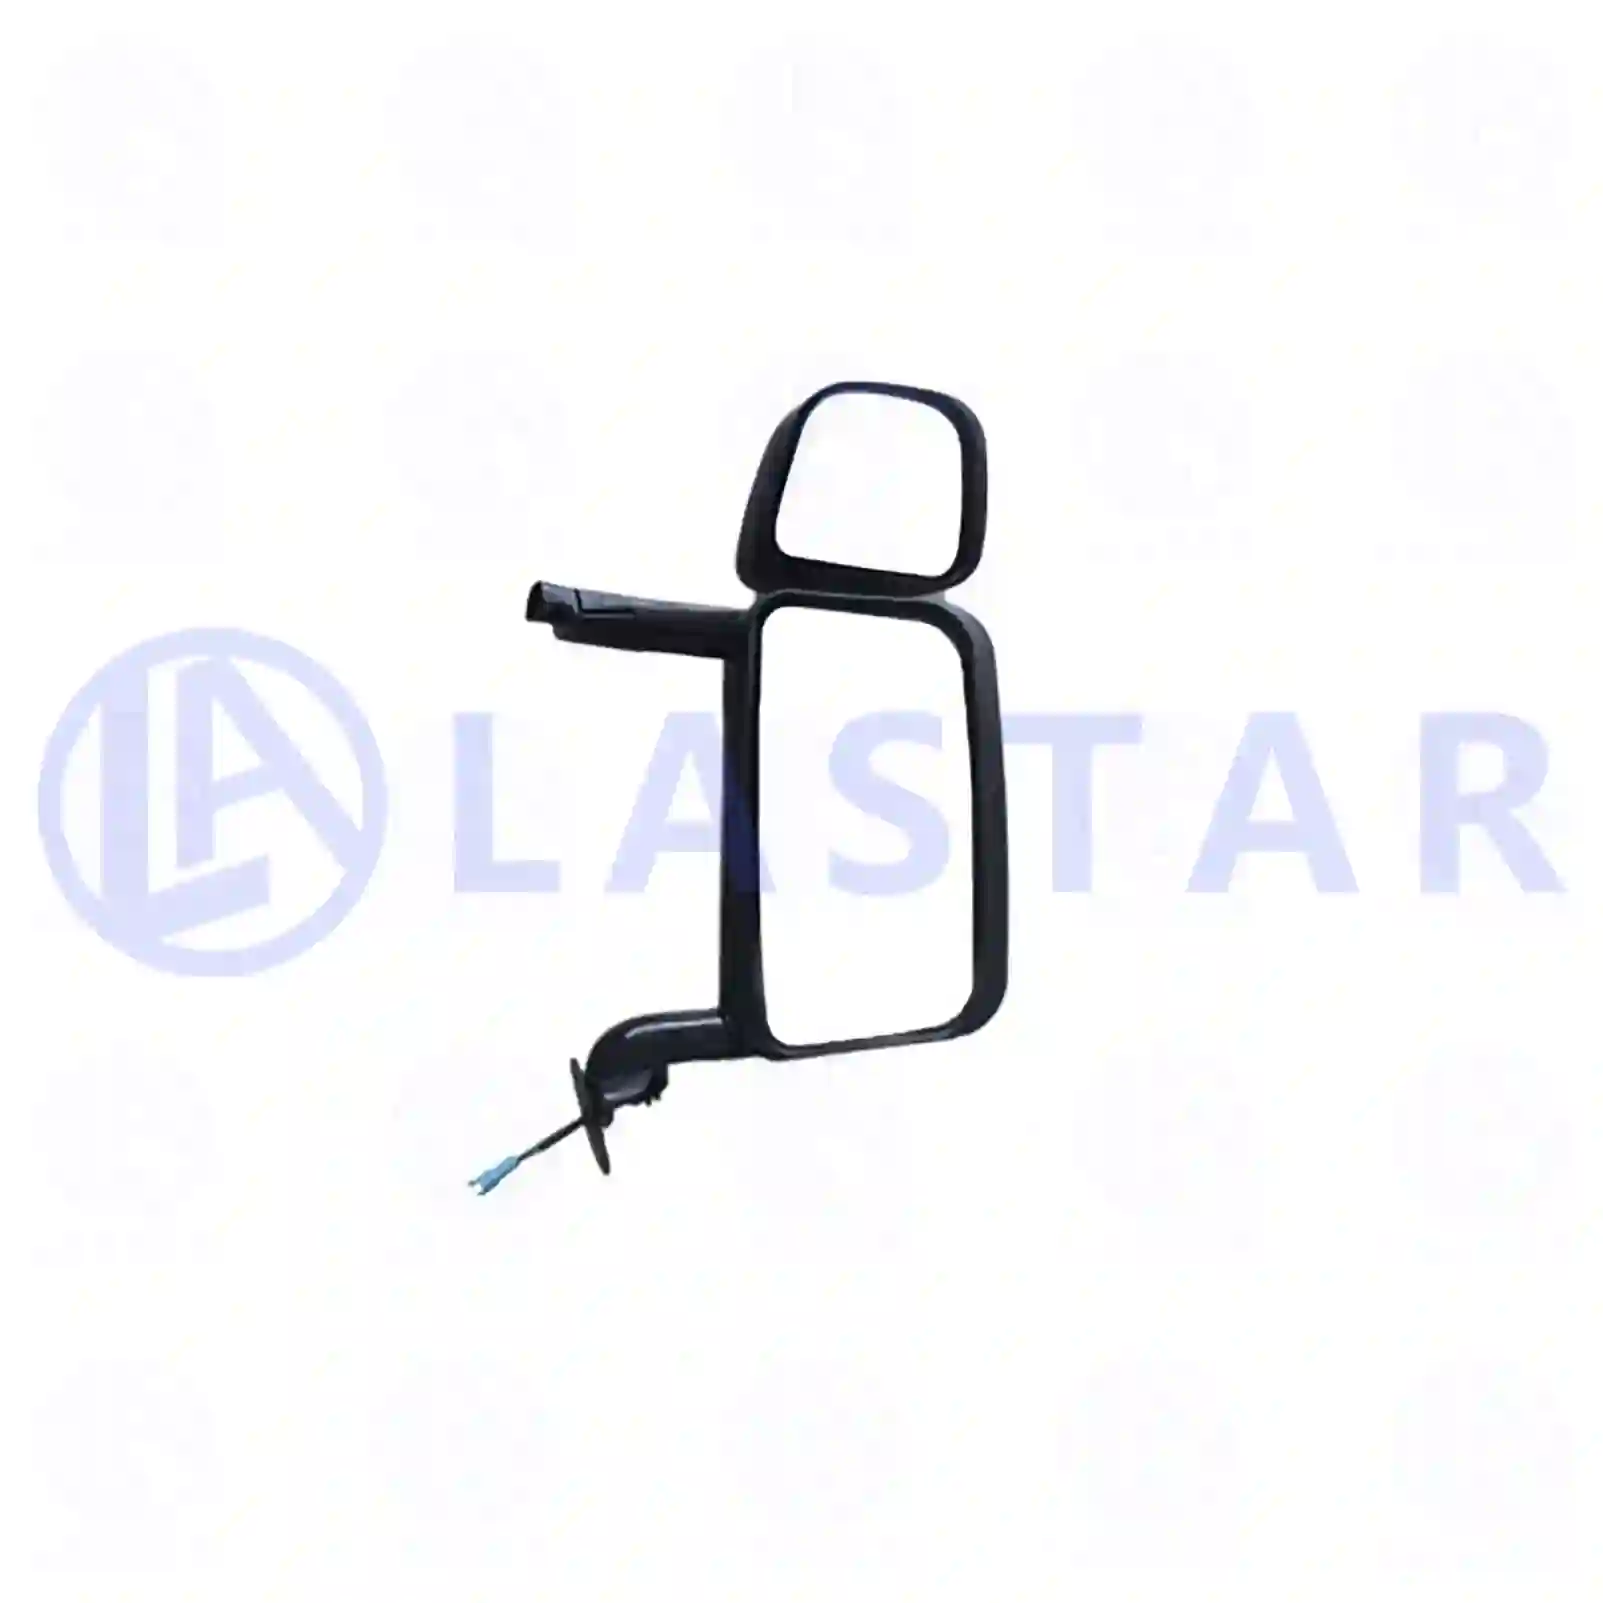 Main mirror, complete, right, heated, electrical, 77720193, 1723519, 2425816, ZG60947-0008 ||  77720193 Lastar Spare Part | Truck Spare Parts, Auotomotive Spare Parts Main mirror, complete, right, heated, electrical, 77720193, 1723519, 2425816, ZG60947-0008 ||  77720193 Lastar Spare Part | Truck Spare Parts, Auotomotive Spare Parts